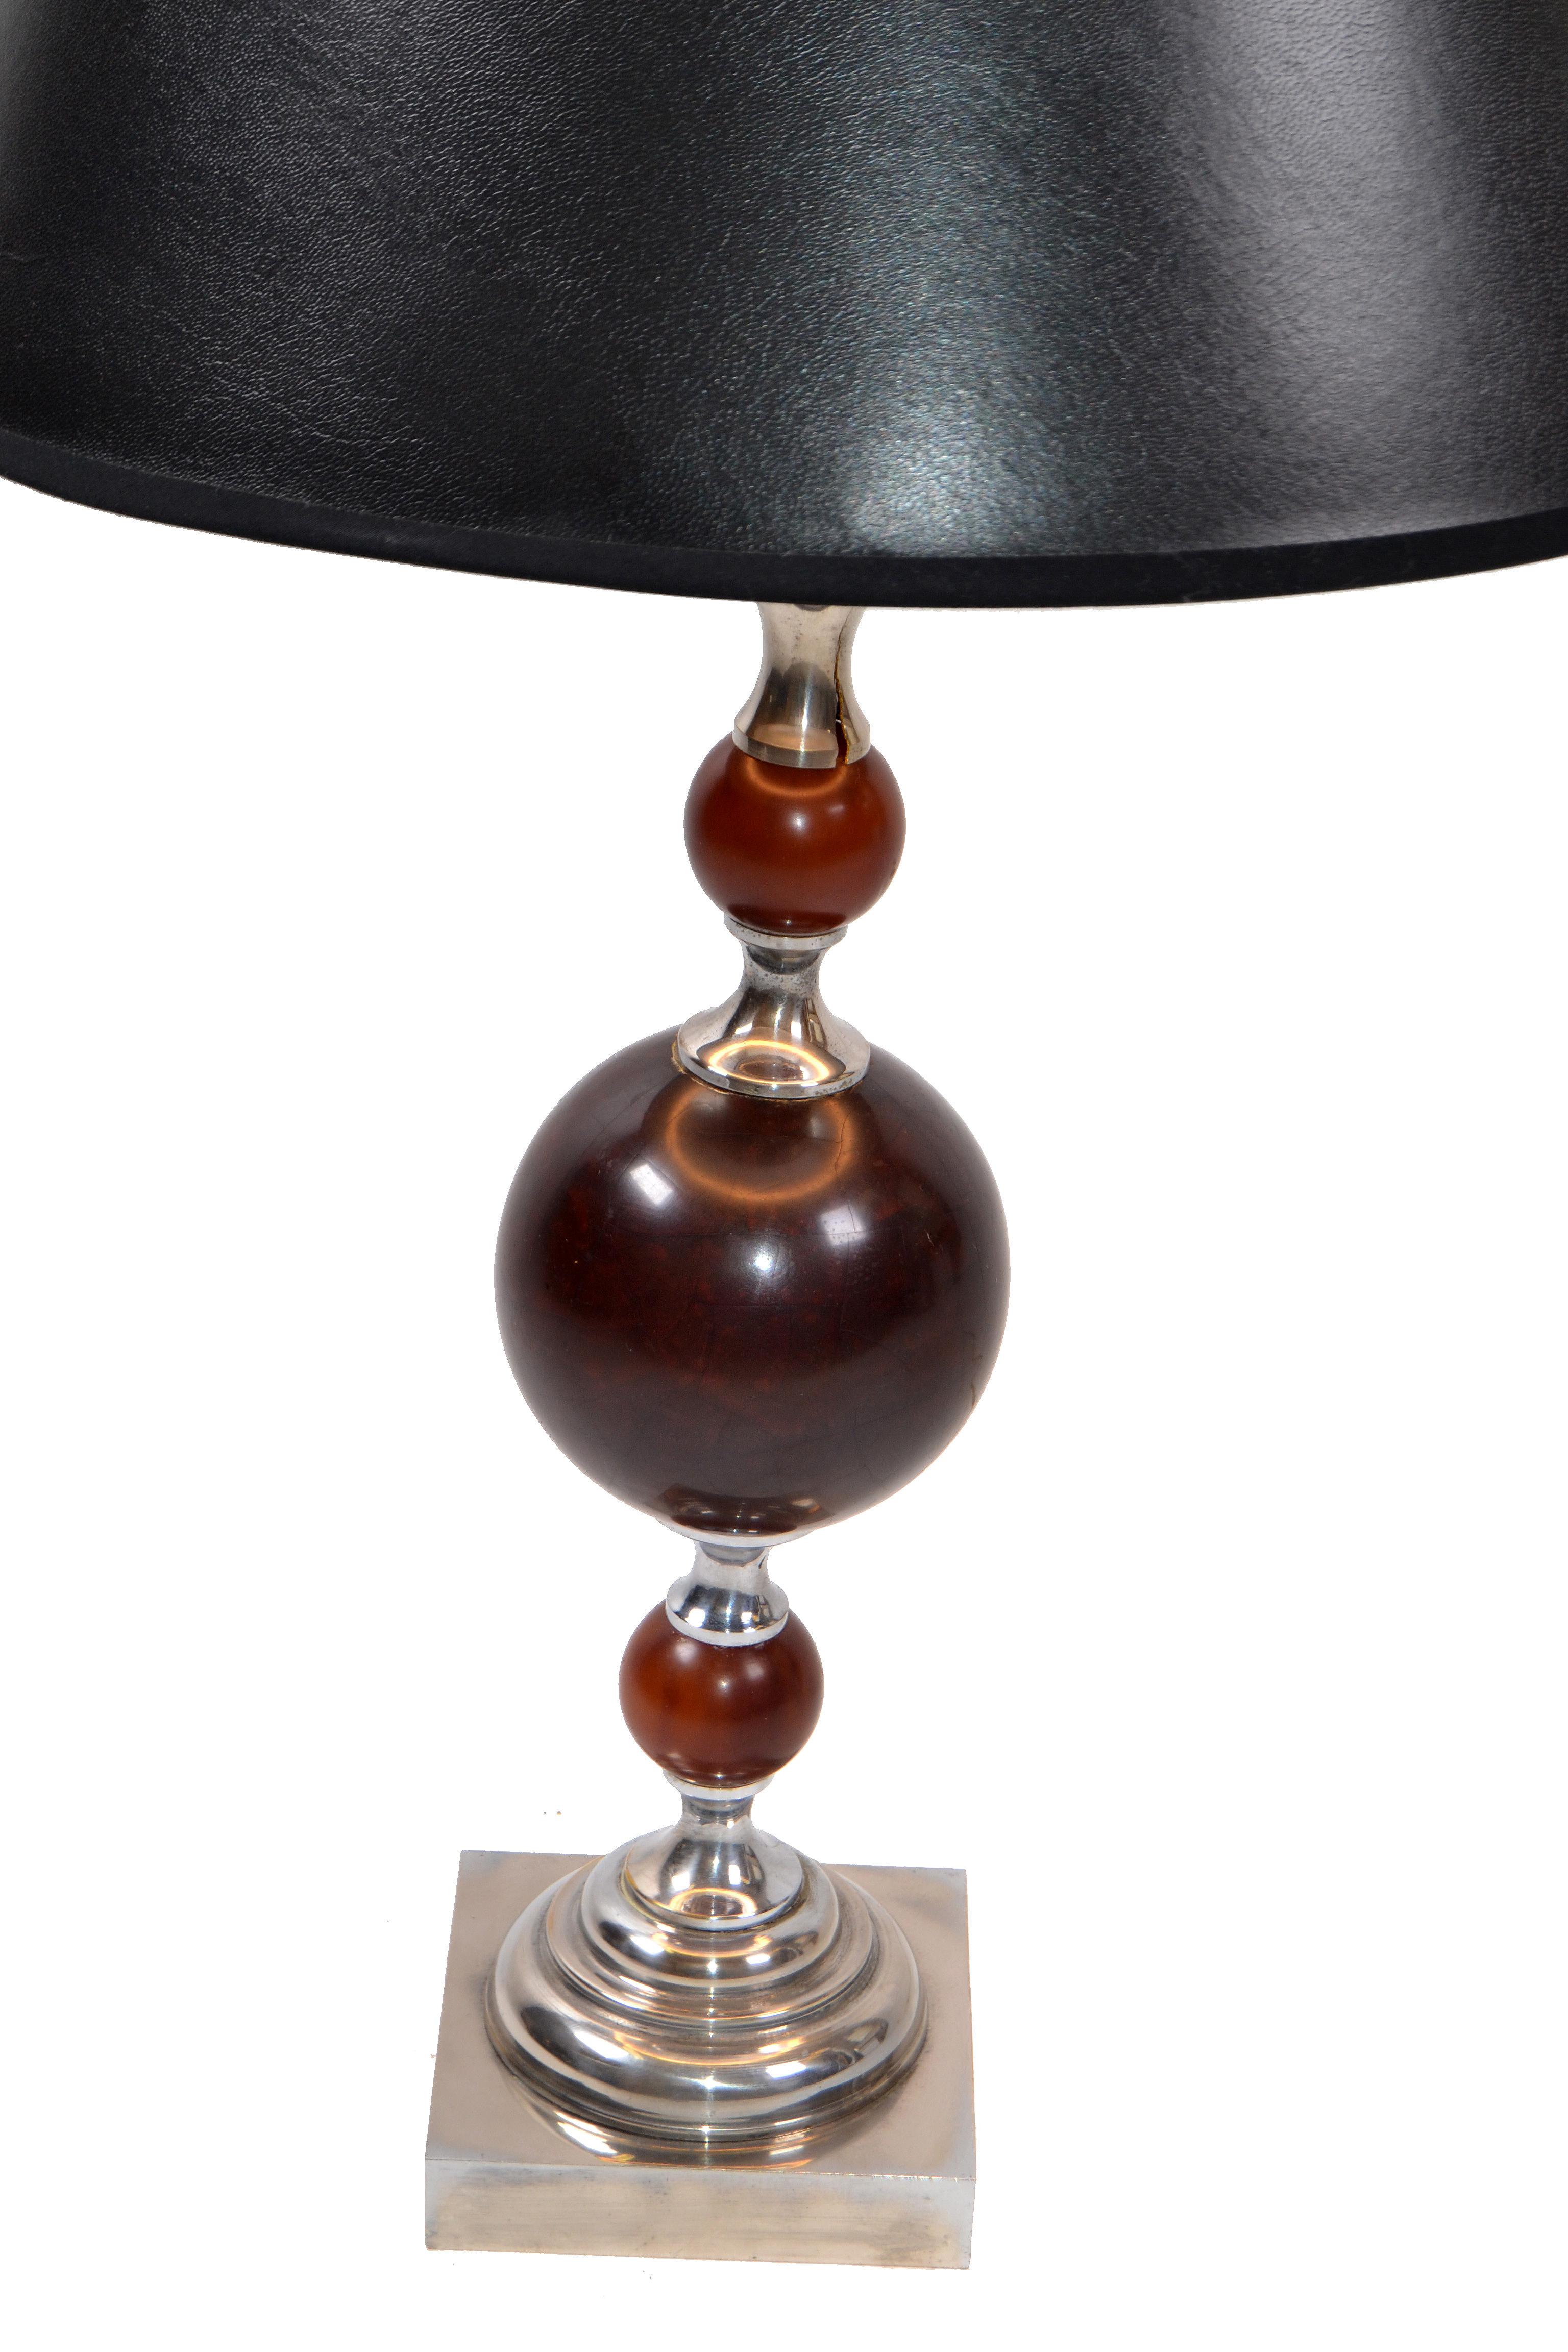 Art Deco Maison Charles style French 3 Burgundy Spheres Nickel-Plated Table Lamp For Sale 2